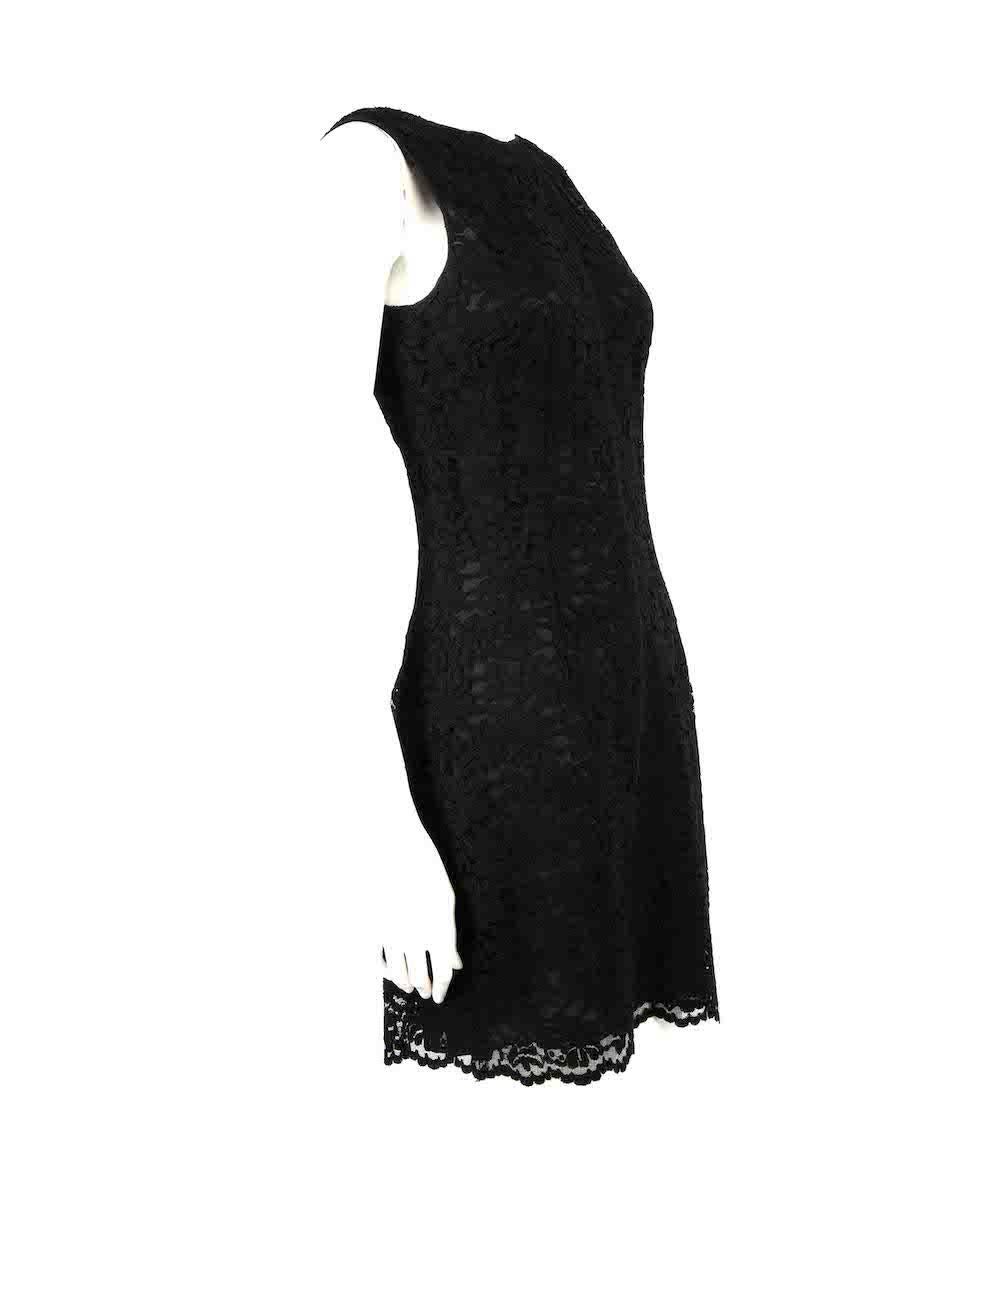 CONDITION is Very good. Hardly any visible wear to dress is evident on this used D&G designer resale item.
 
 
 
 Details
 
 
 Black
 
 Lace
 
 Dress
 
 Mini
 
 Sleeveless
 
 Round neck
 
 Back zip fastening
 
 
 
 
 
 Made in Morocco
 
 
 
